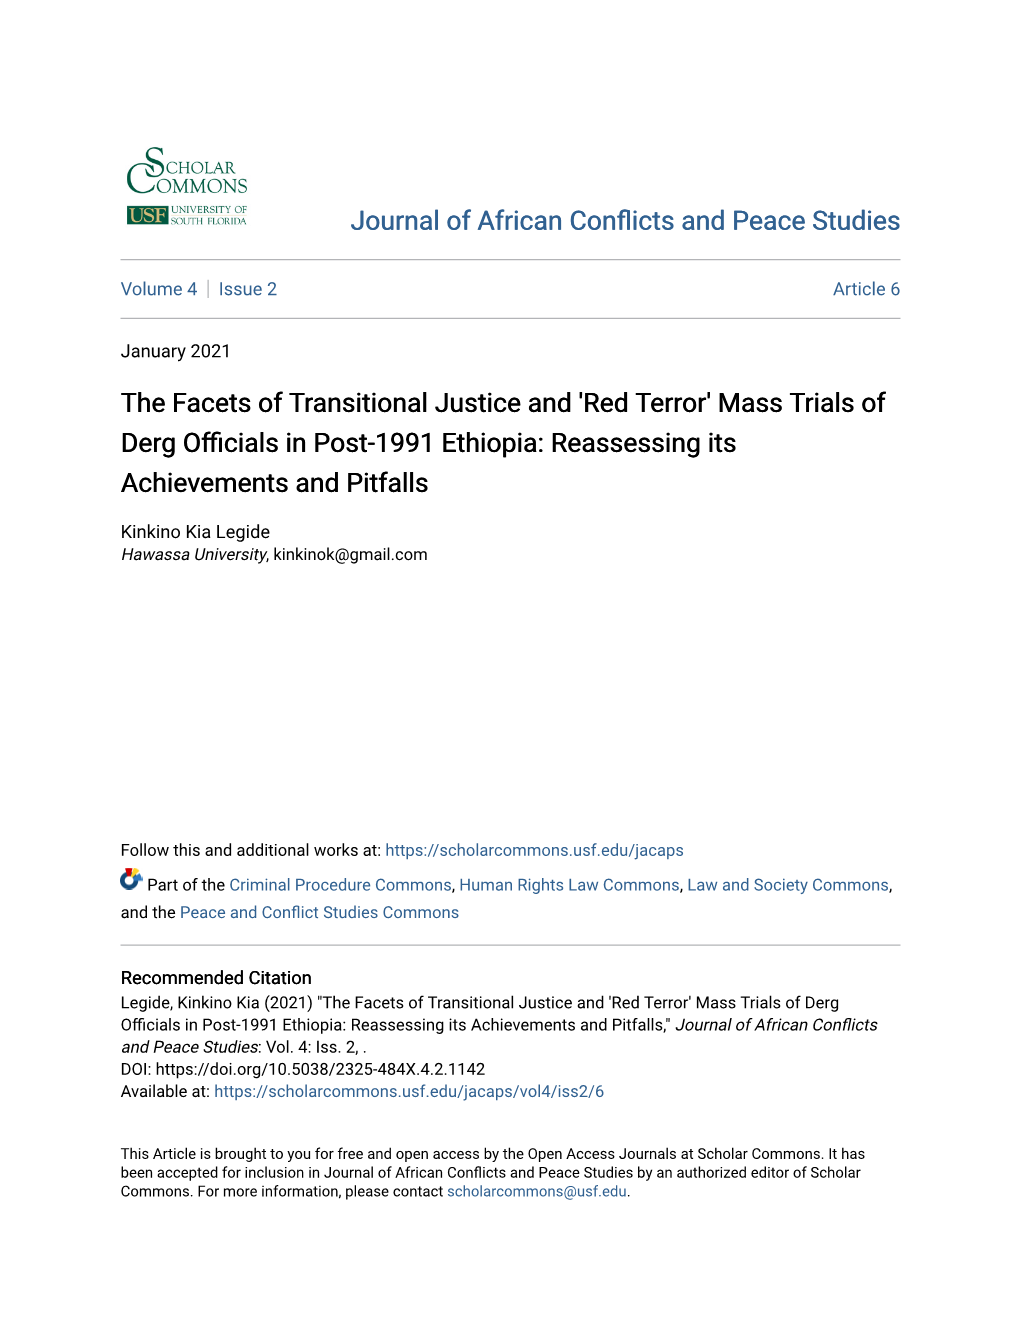 Red Terror' Mass Trials of Derg Officials Inost-1991 P Ethiopia: Reassessing Its Achievements and Pitfalls